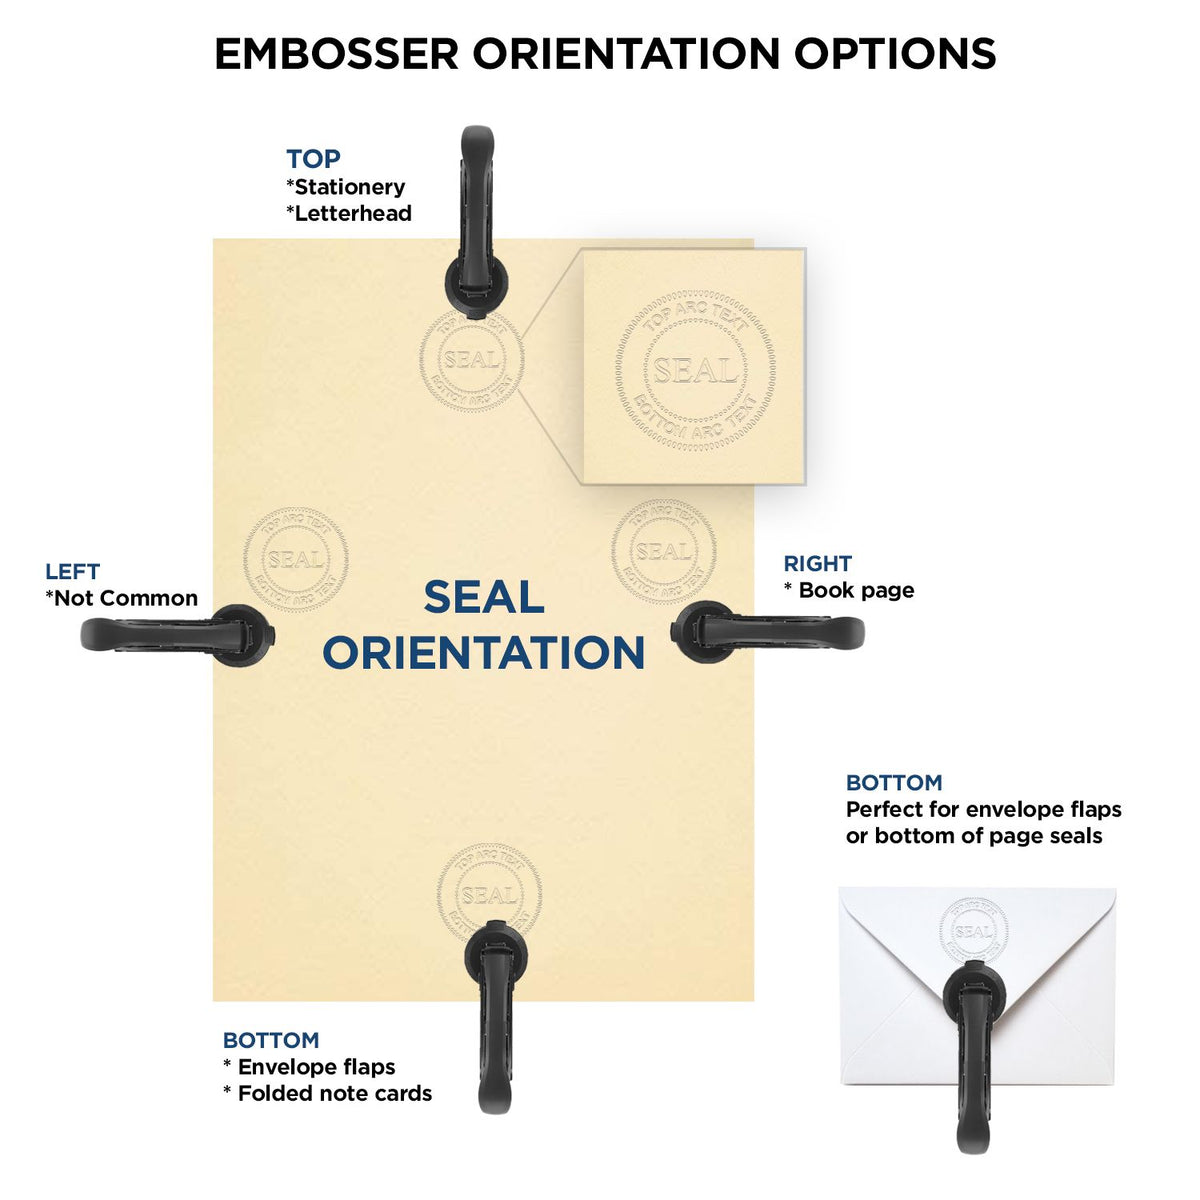 An infographic for the Heavy Duty Cast Iron Kansas Geologist Seal Embosser showing embosser orientation, this is showing examples of a top, bottom, right and left insert.